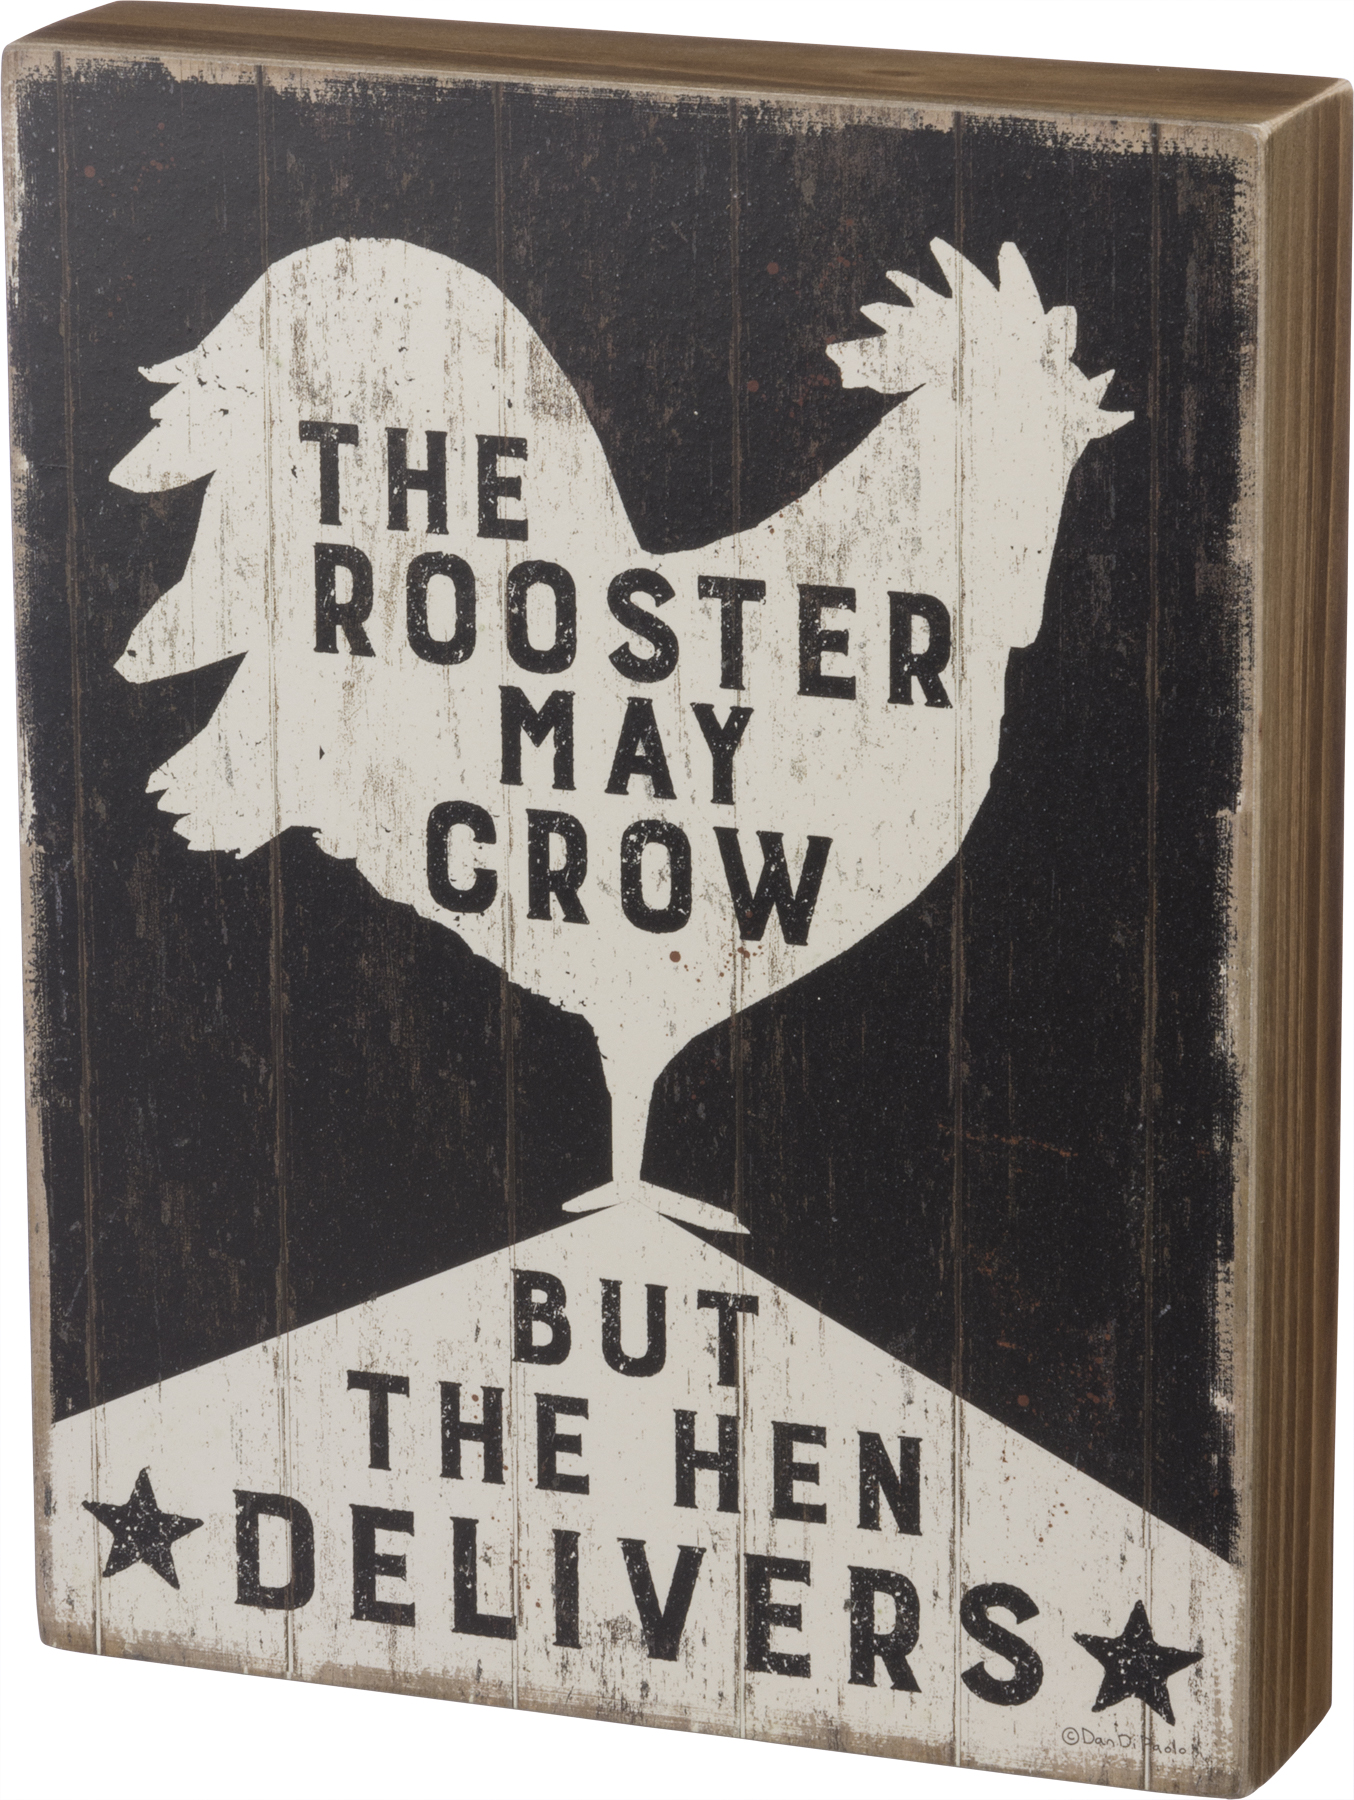 The rooster may crow but hen delivers goods tin metal best home decor